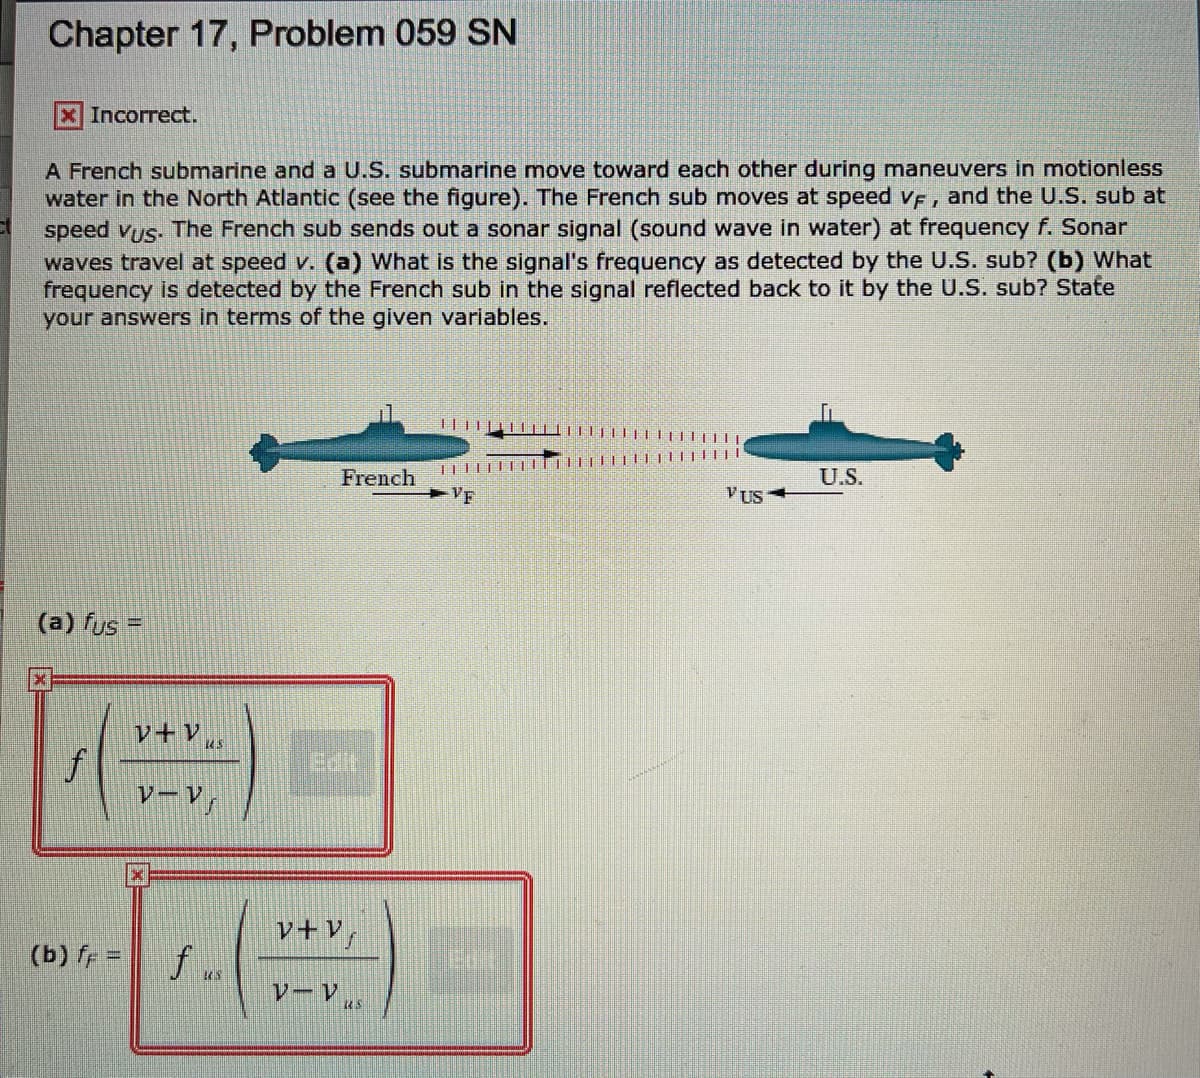 Chapter 17, Problem 059 SN
x Incorrect.
A French submarine and a U.S. submarine move toward each other during maneuvers in motionless
water in the North Atlantic (see the figure). The French sub moves at speed vF, and the U.S. sub at
speed vus. The French sub sends out a sonar signal (sound wave in water) at frequency f. Sonar
waves travel at speed v. (a) What is the signal's frequency as detected by the U.S. sub? (b) What
frequency is detected by the French sub in the signal reflected back to it by the U.S. sub? State
your answers in terms of the given variables.
French
U.S.
VF
VUS
(a) fus =
レーV」
v+Vf
(b) fr =
f ..
